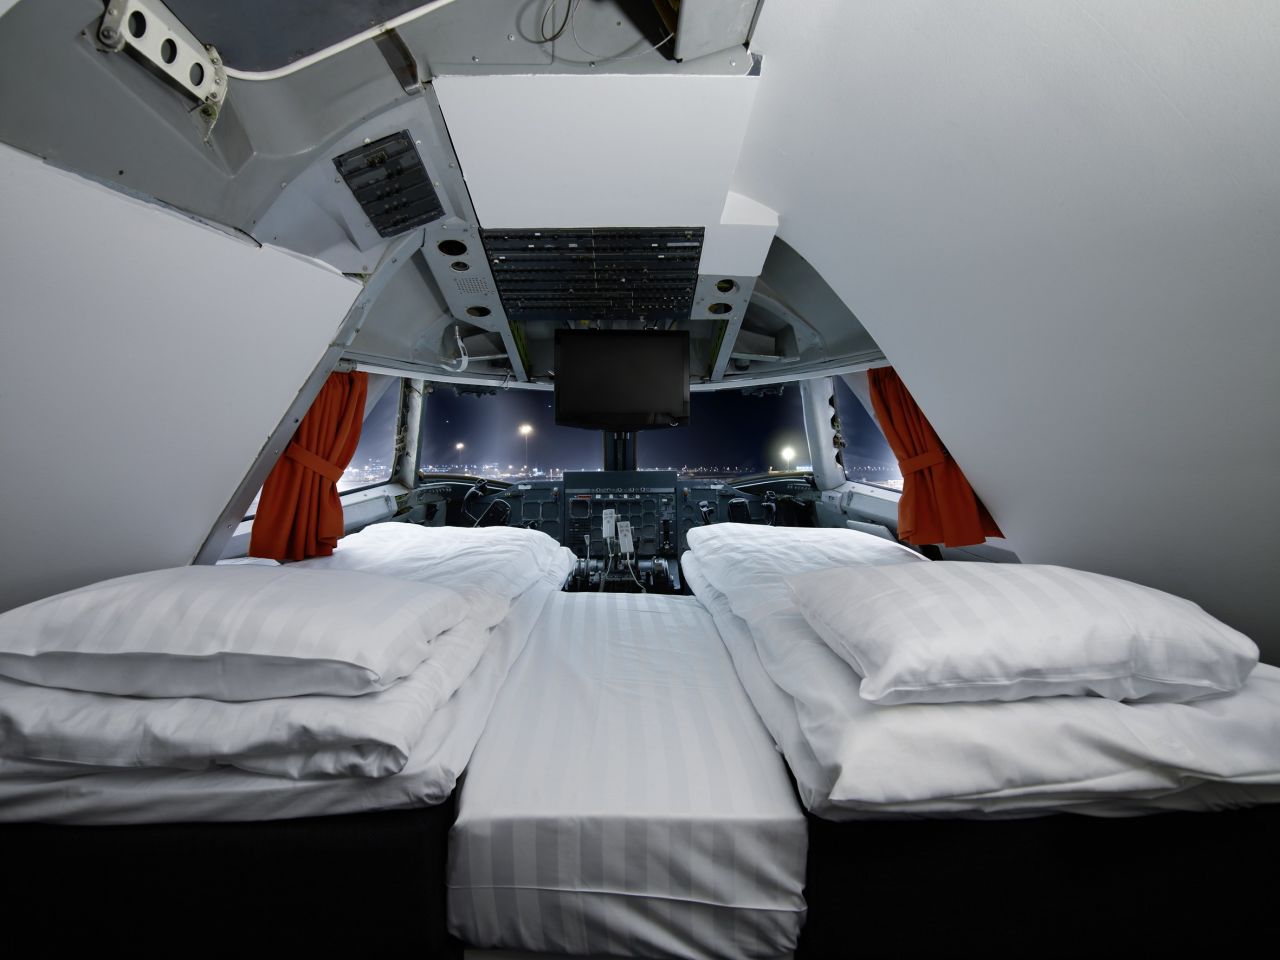 You can stay inside an old jet in the Jumbo Stay Hotel.